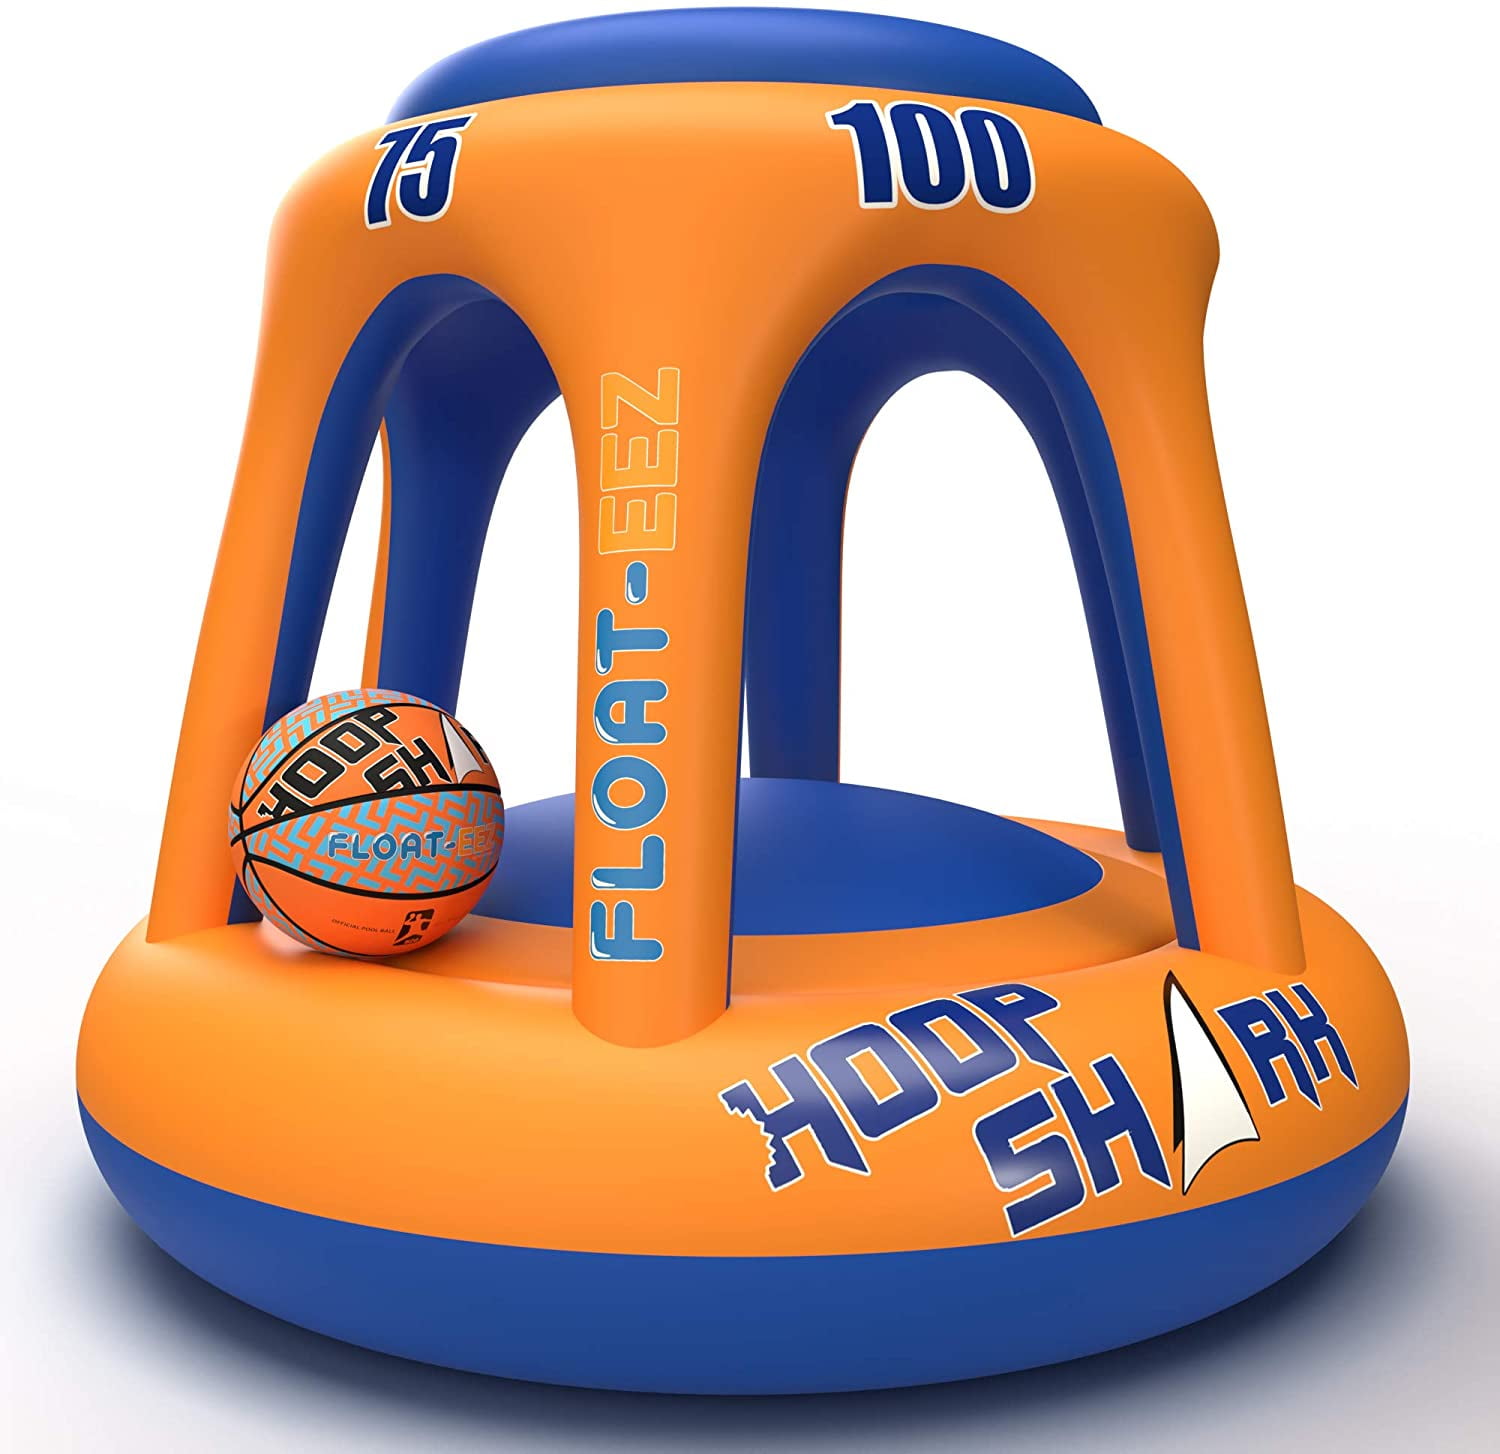 Swimming Pool Basketball Hoop Set Ultimate and - Perfect - Competitive Hoop Orange/Blue Inflatable - by Shark Summer Toy Play Trick with - Shots Water Ball Hoop for